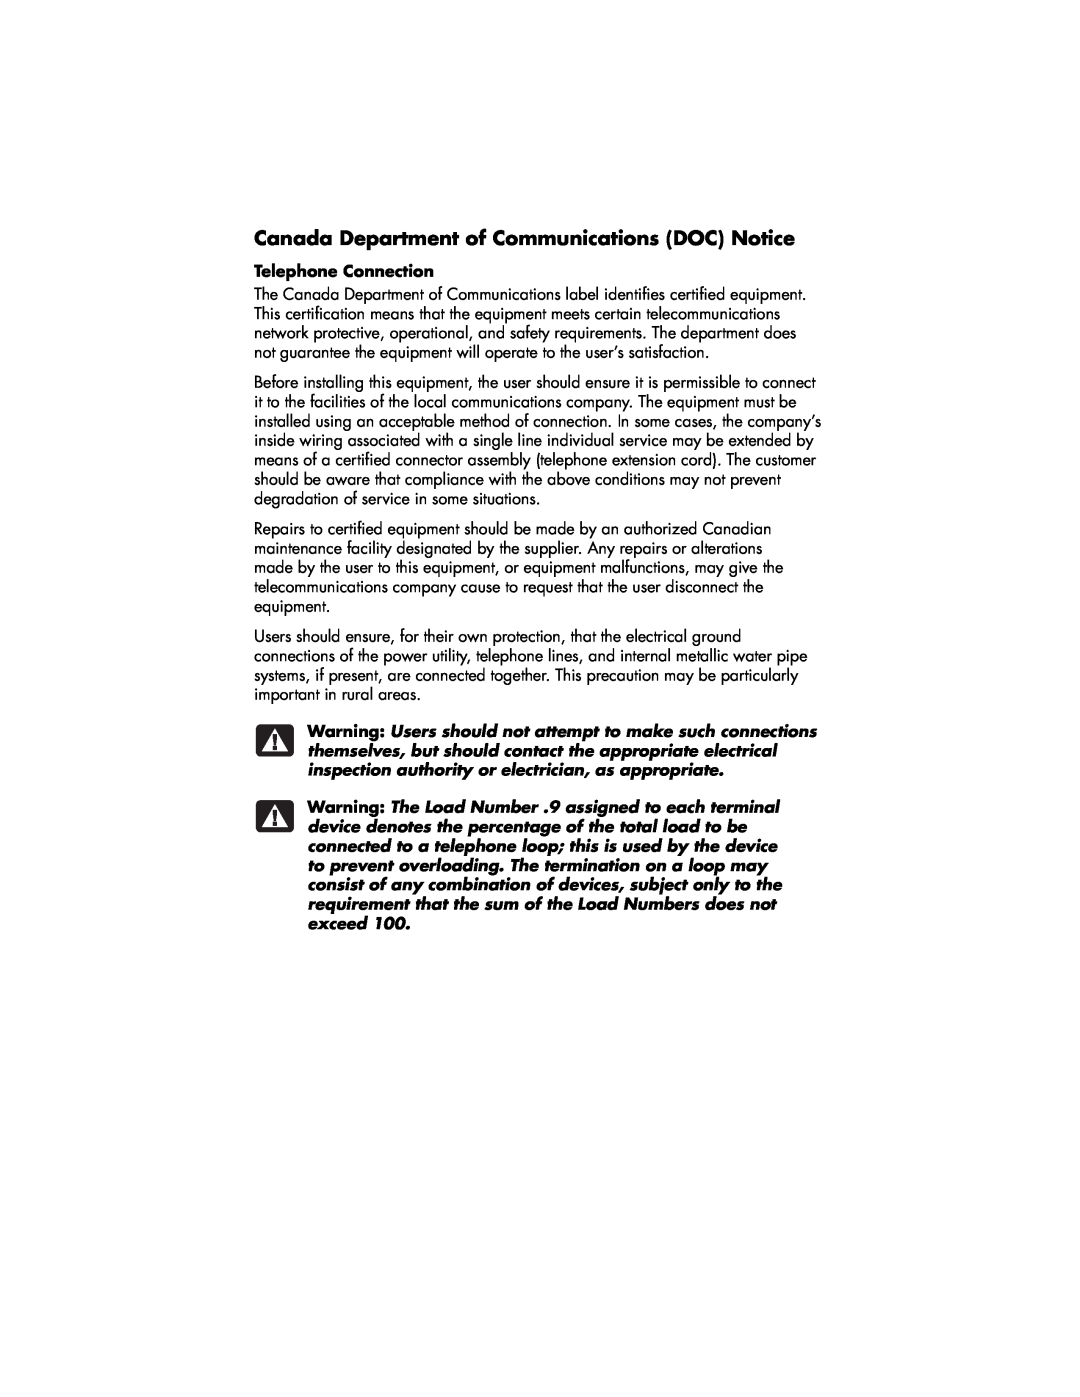 HP 525w (US/CAN), 735n (US/CAN), 725n (US/CAN) manual Canada Department of Communications DOC Notice, Telephone Connection 